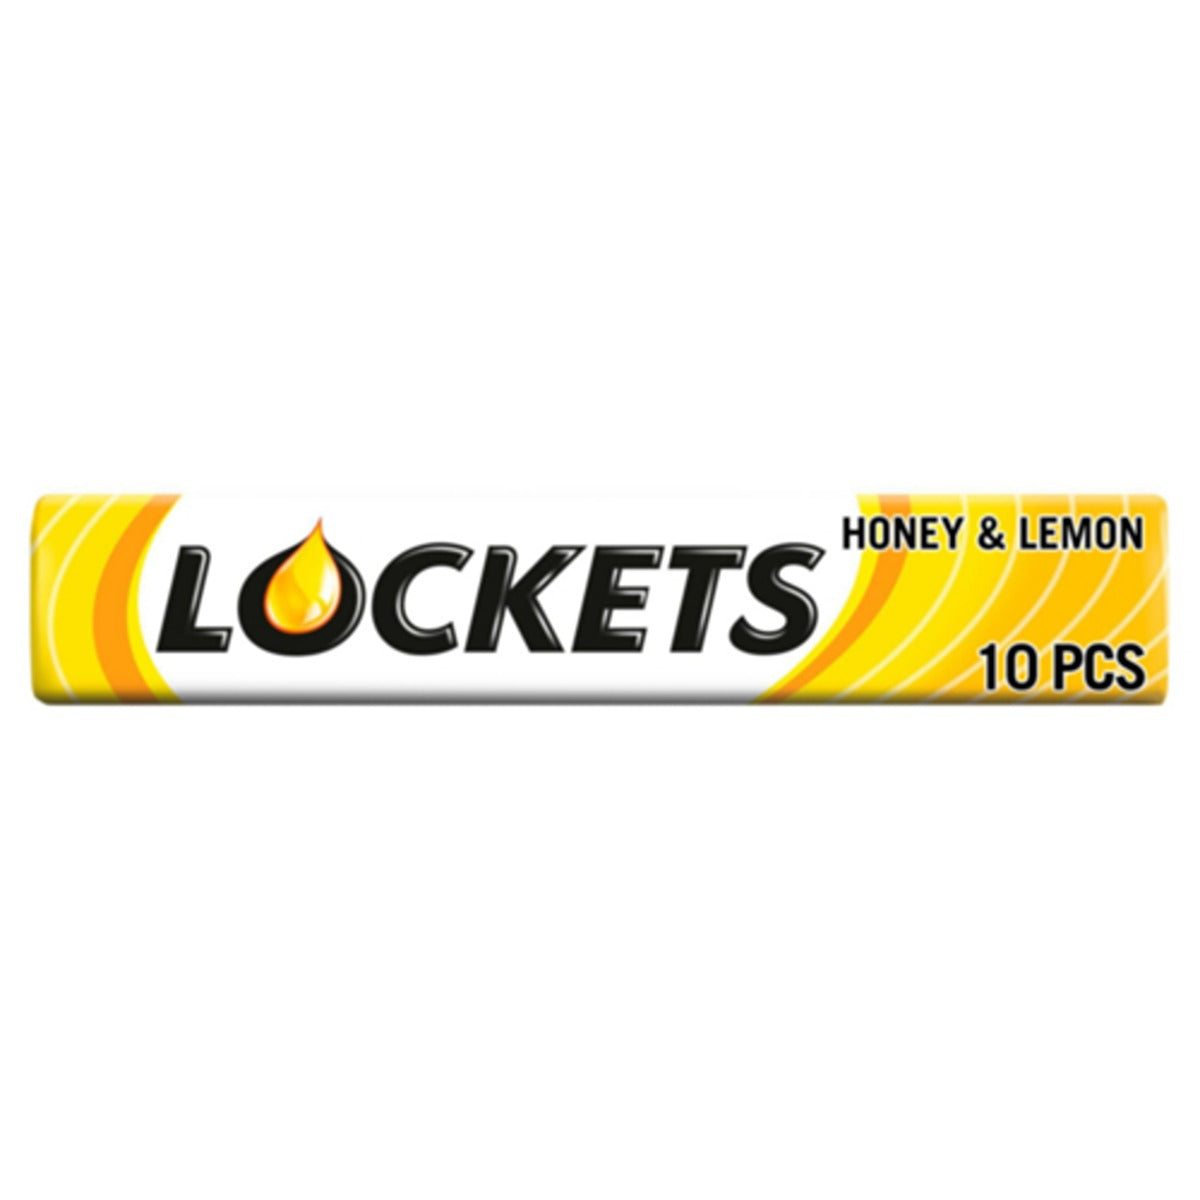 Lockets - Honey and Lemon Candy - 41g - Continental Food Store